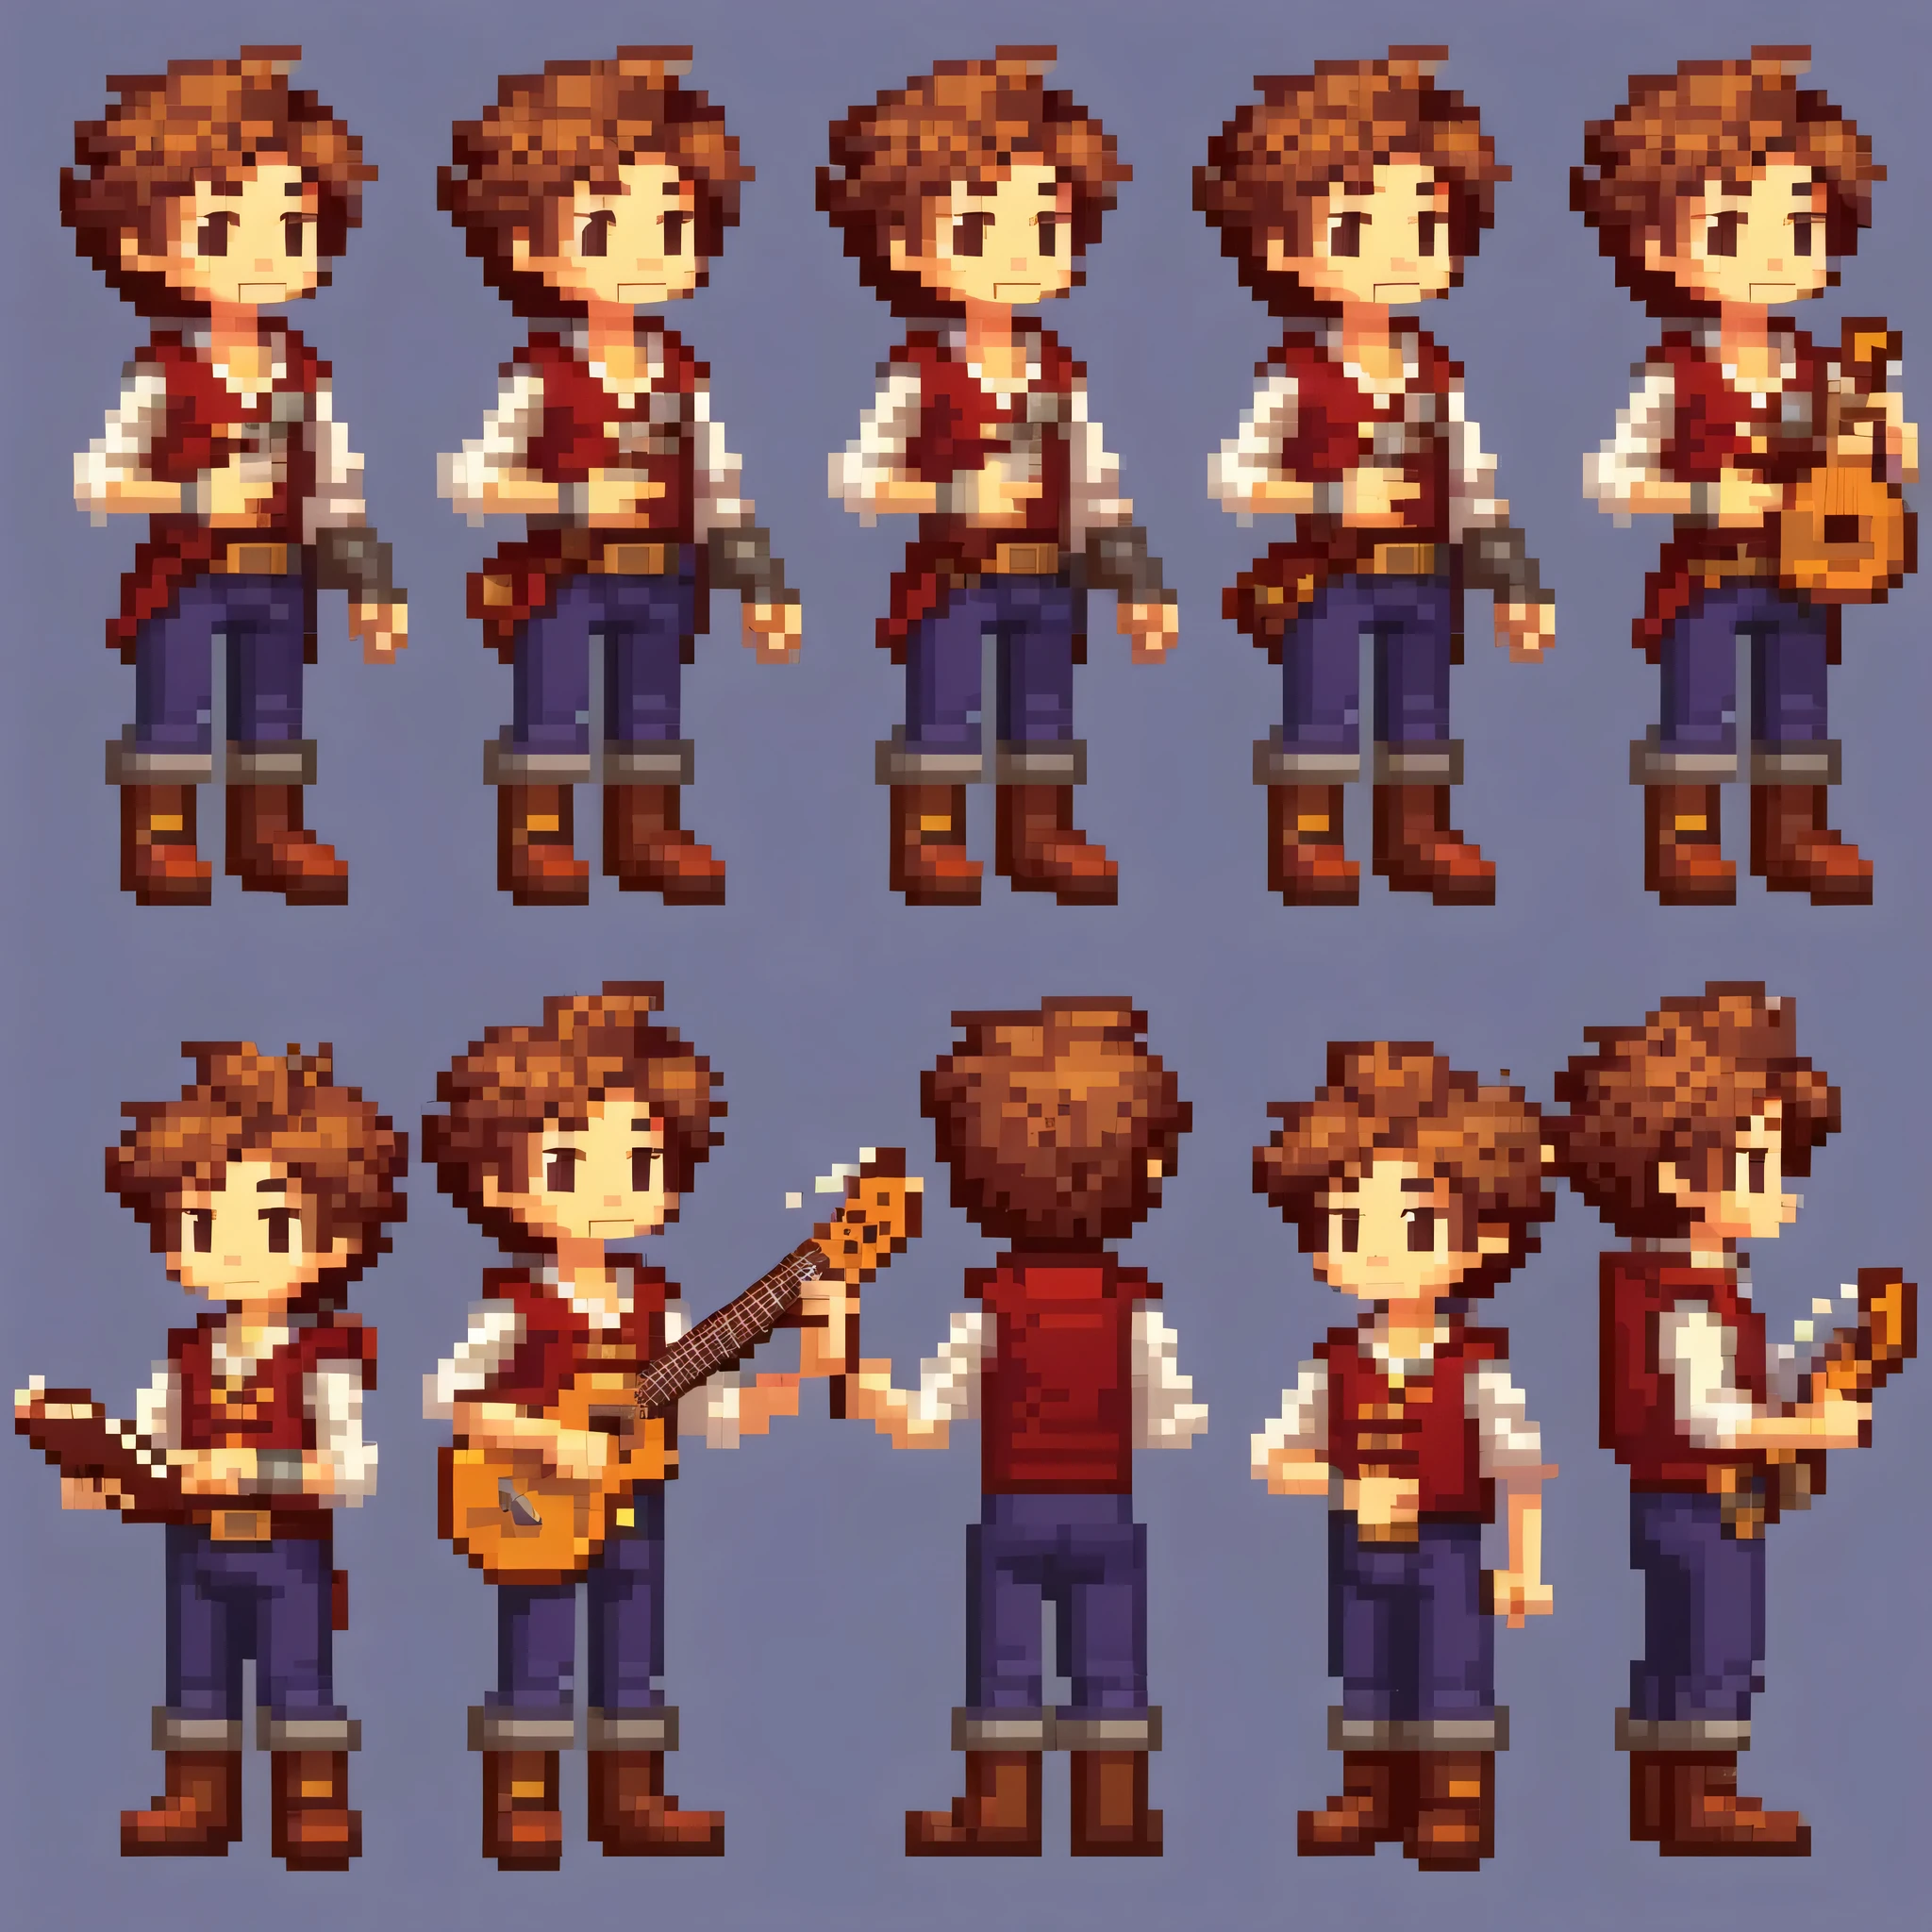 Pixel art,Pixel art,Create an original character design sheet,main character of the game,boy,juvenile,natural perm,,musical instrument,bard,Note,sing,play,((3 views,whole body, background,multiple views,High resolution)),multiple views,multiple poses,Active,action pose,dynamic,nice,cute,masterpiece,highest quality,In detail,Gracefully,RPG,Famicom,multiple characters,multiple costumes,Final Fantasy,boldly,effect icon,Item Icon